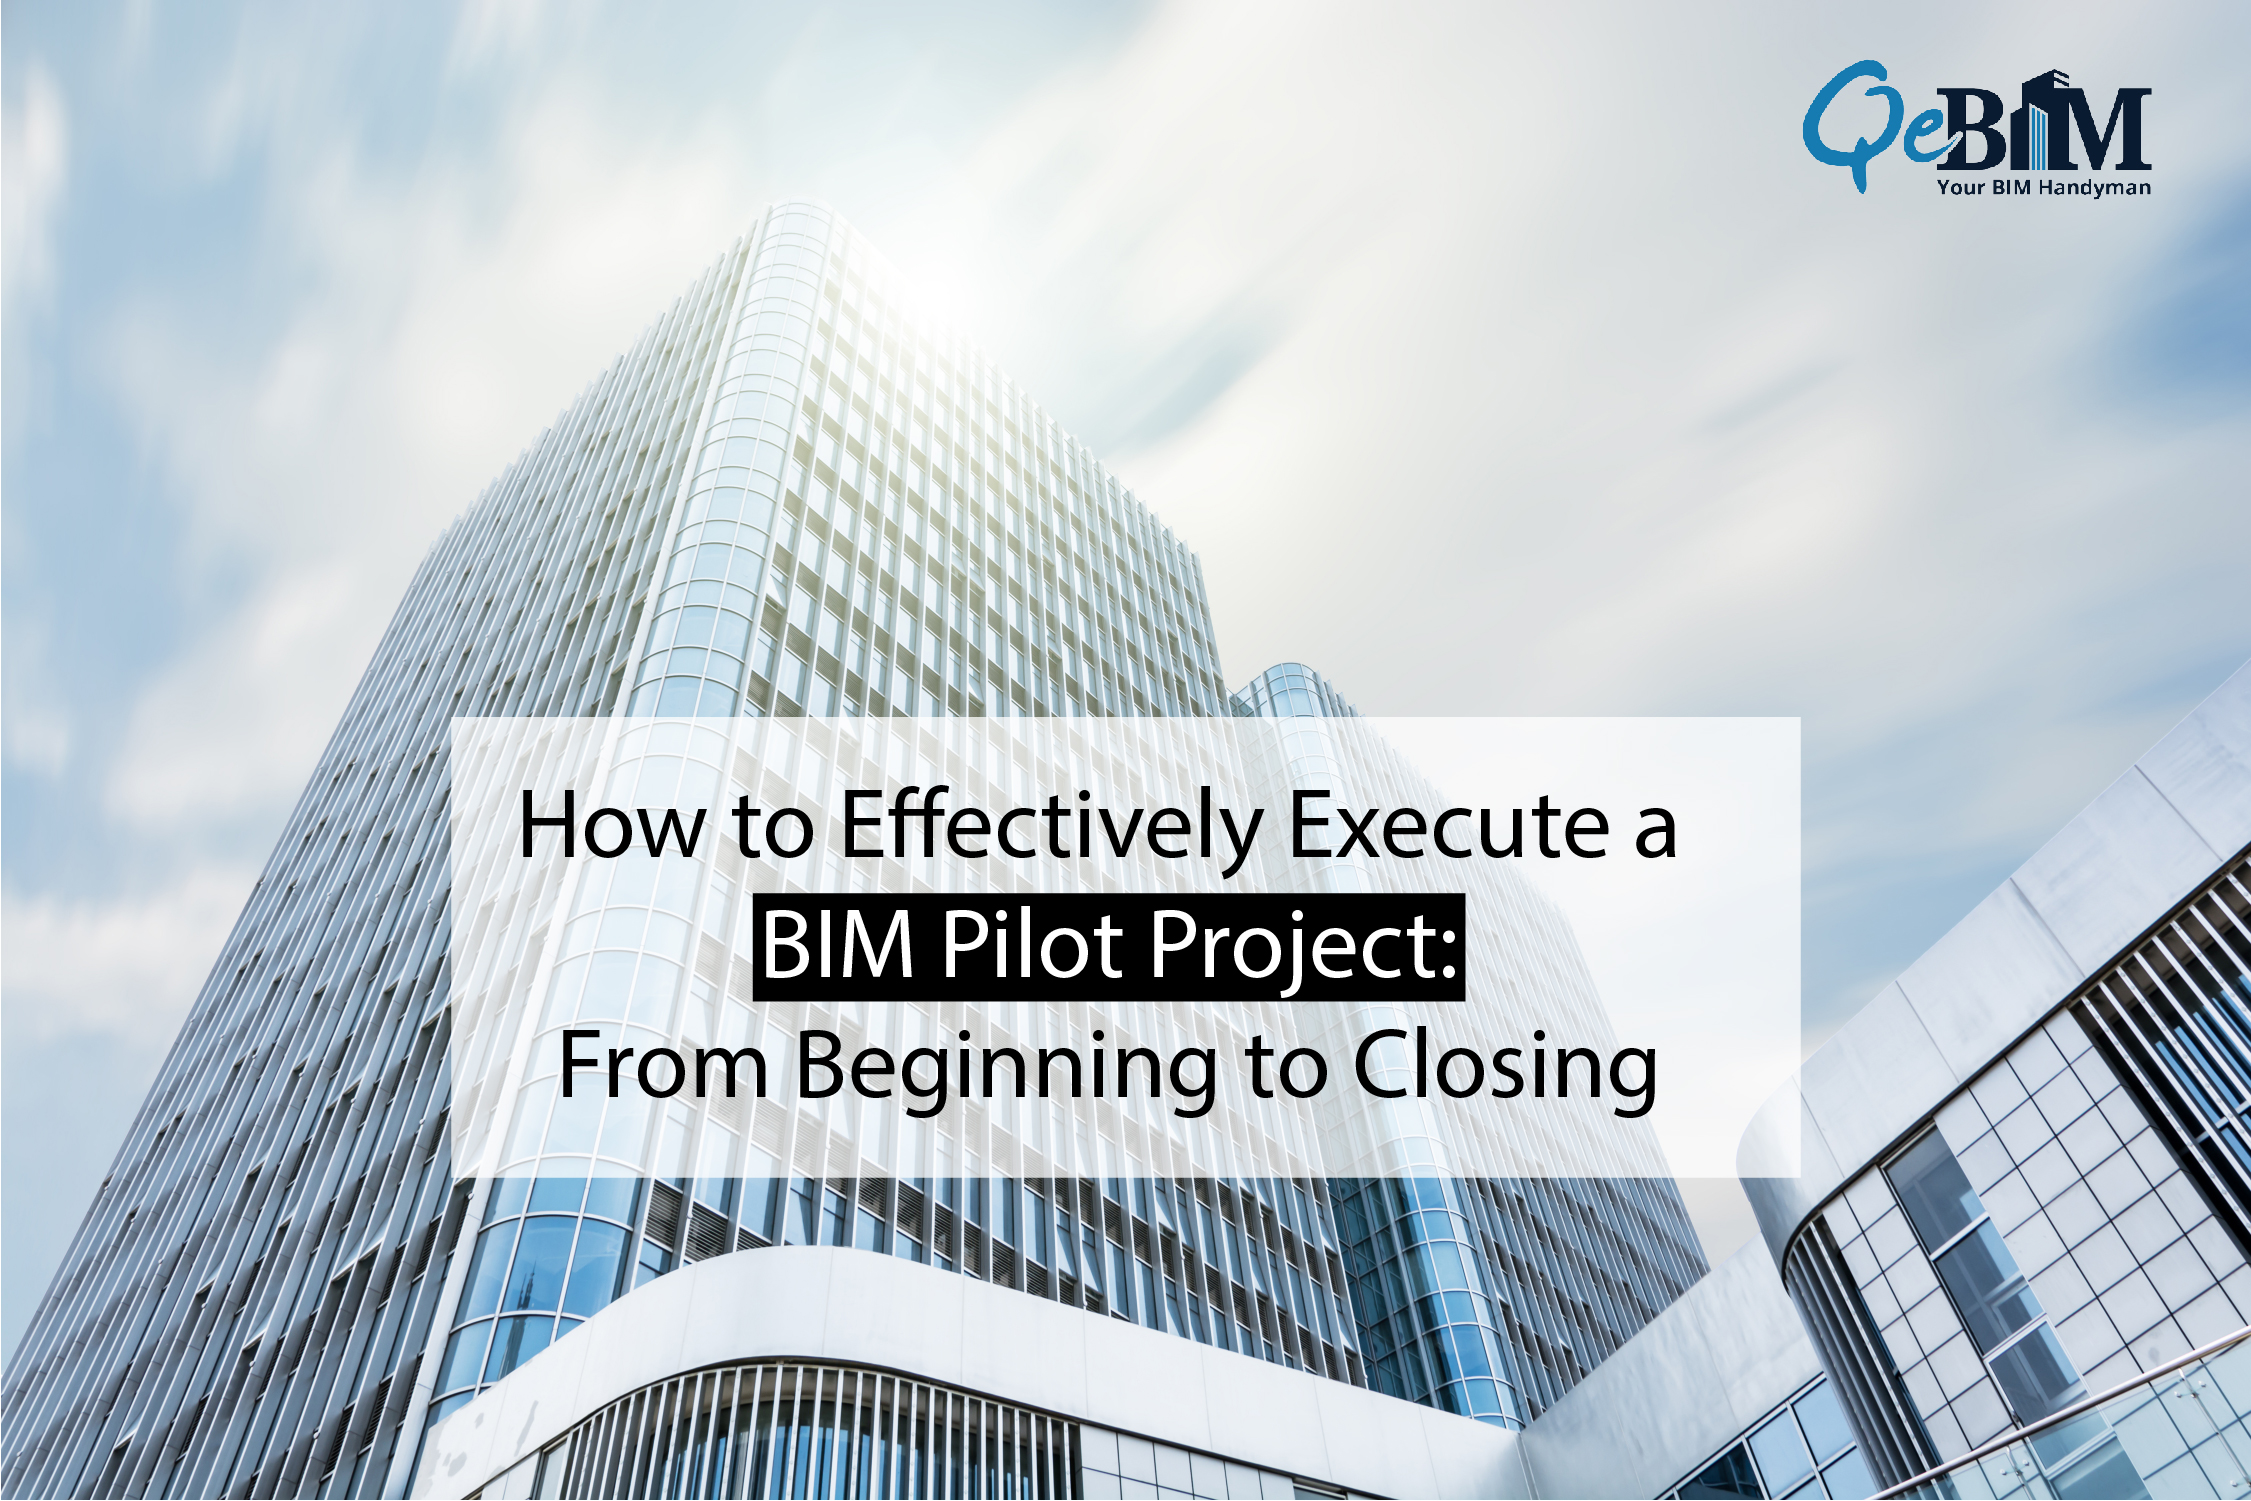 How to Effectively Execute a BIM Pilot Project: From Beginning to Closing